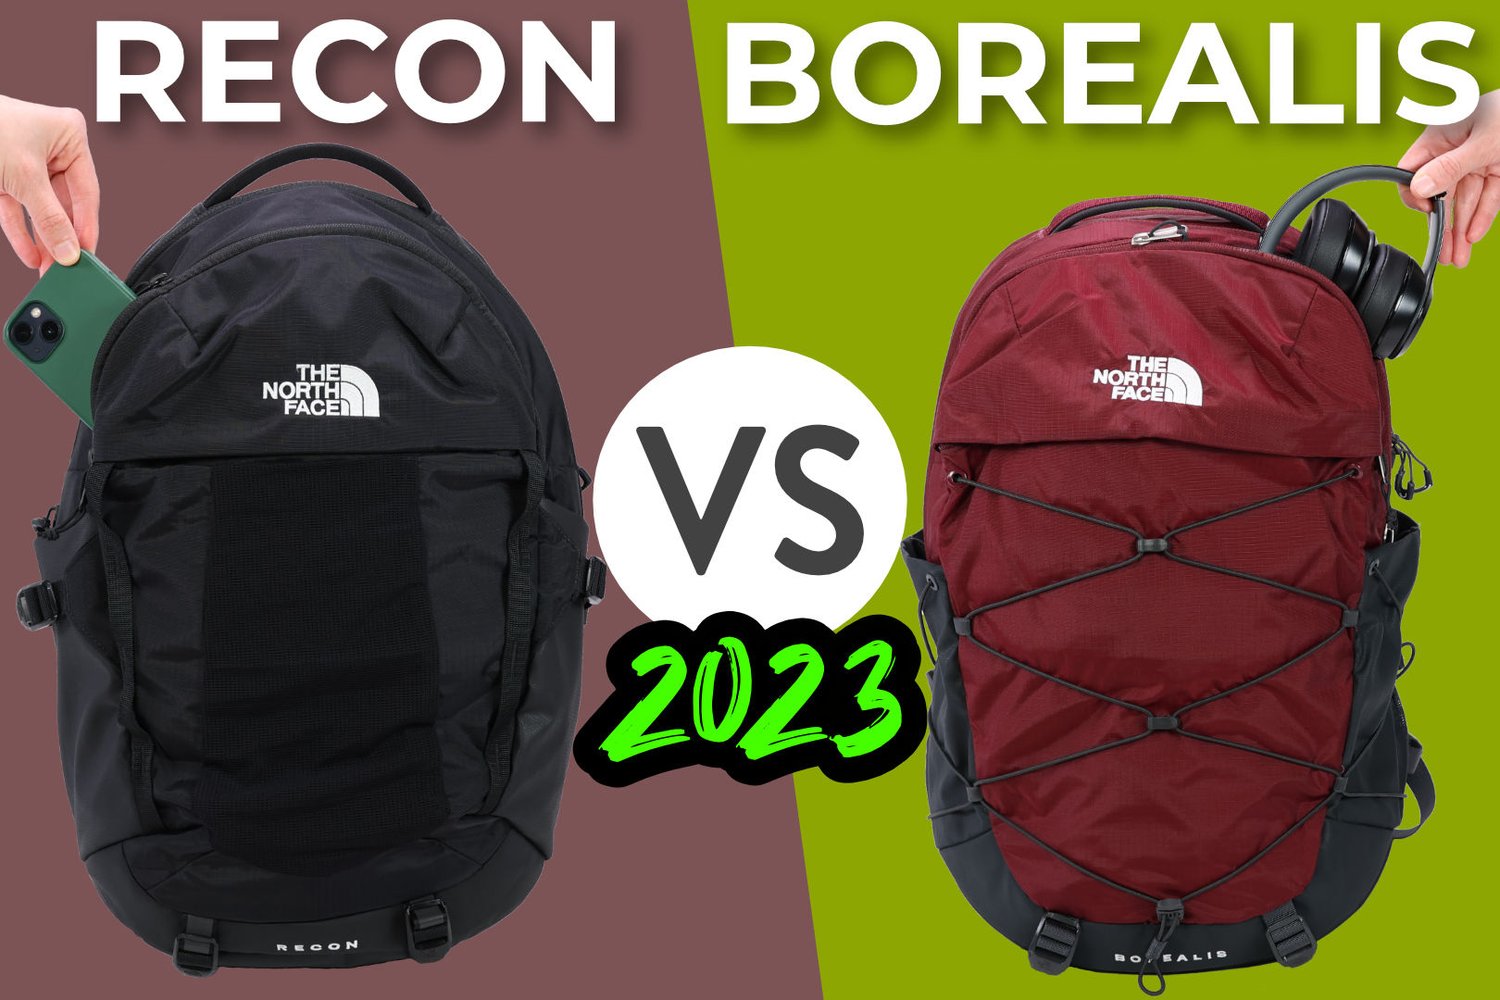 capaciteit Industrialiseren enthousiasme North Face Recon vs Borealis in 2023 - Side-By-Side | Backpackies